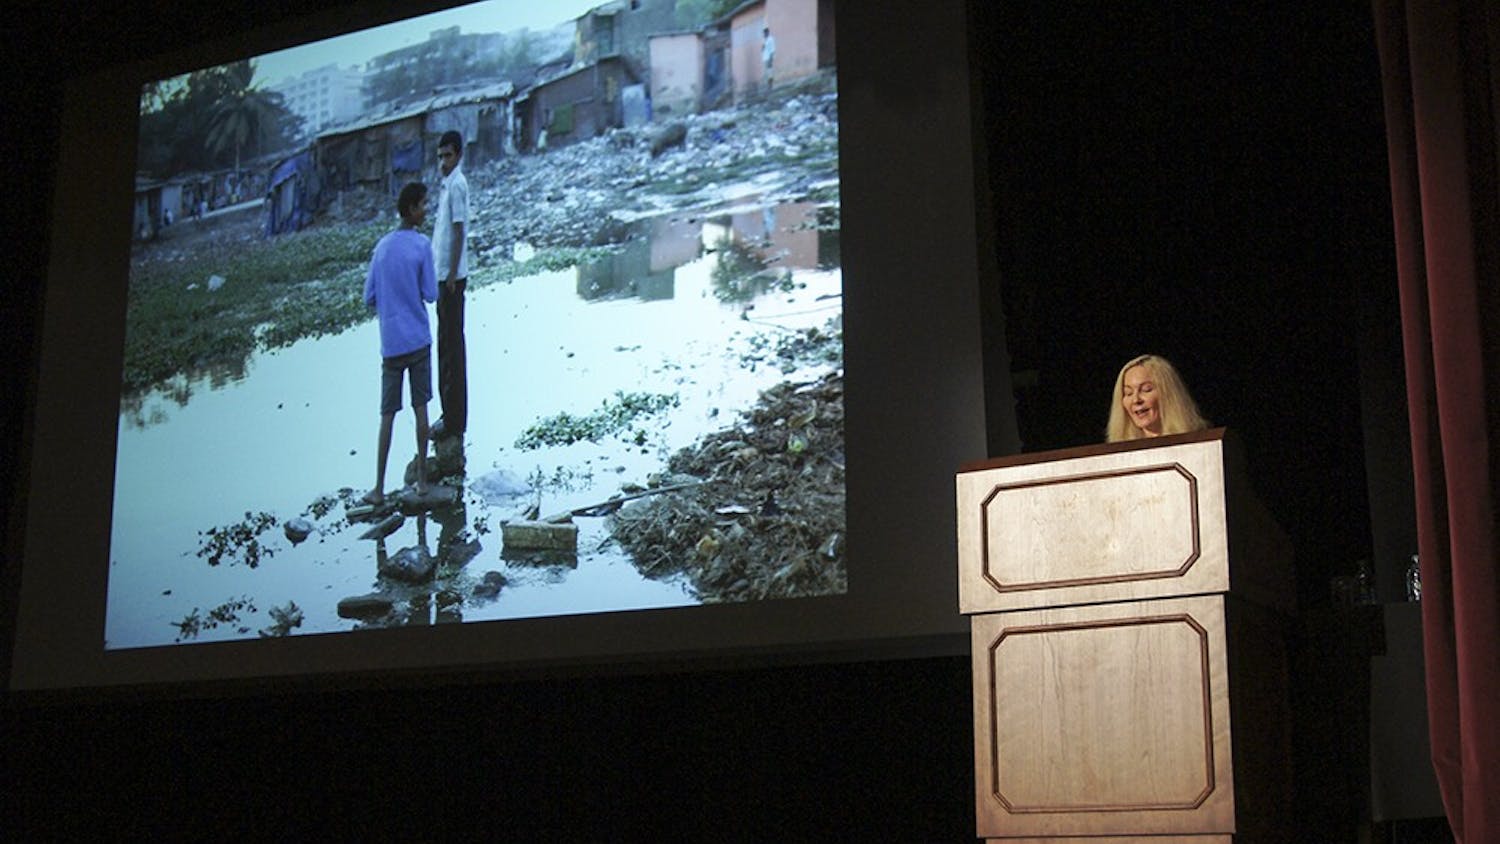 Pulitzer Prize-winner Katherine Boo speaks about her book, "Behind the Beautiful Forevers: Life, Death and Hope in a Mumbai Undercity" during her talk Thursday at Alumni Hall in the Indiana Memorial Union.